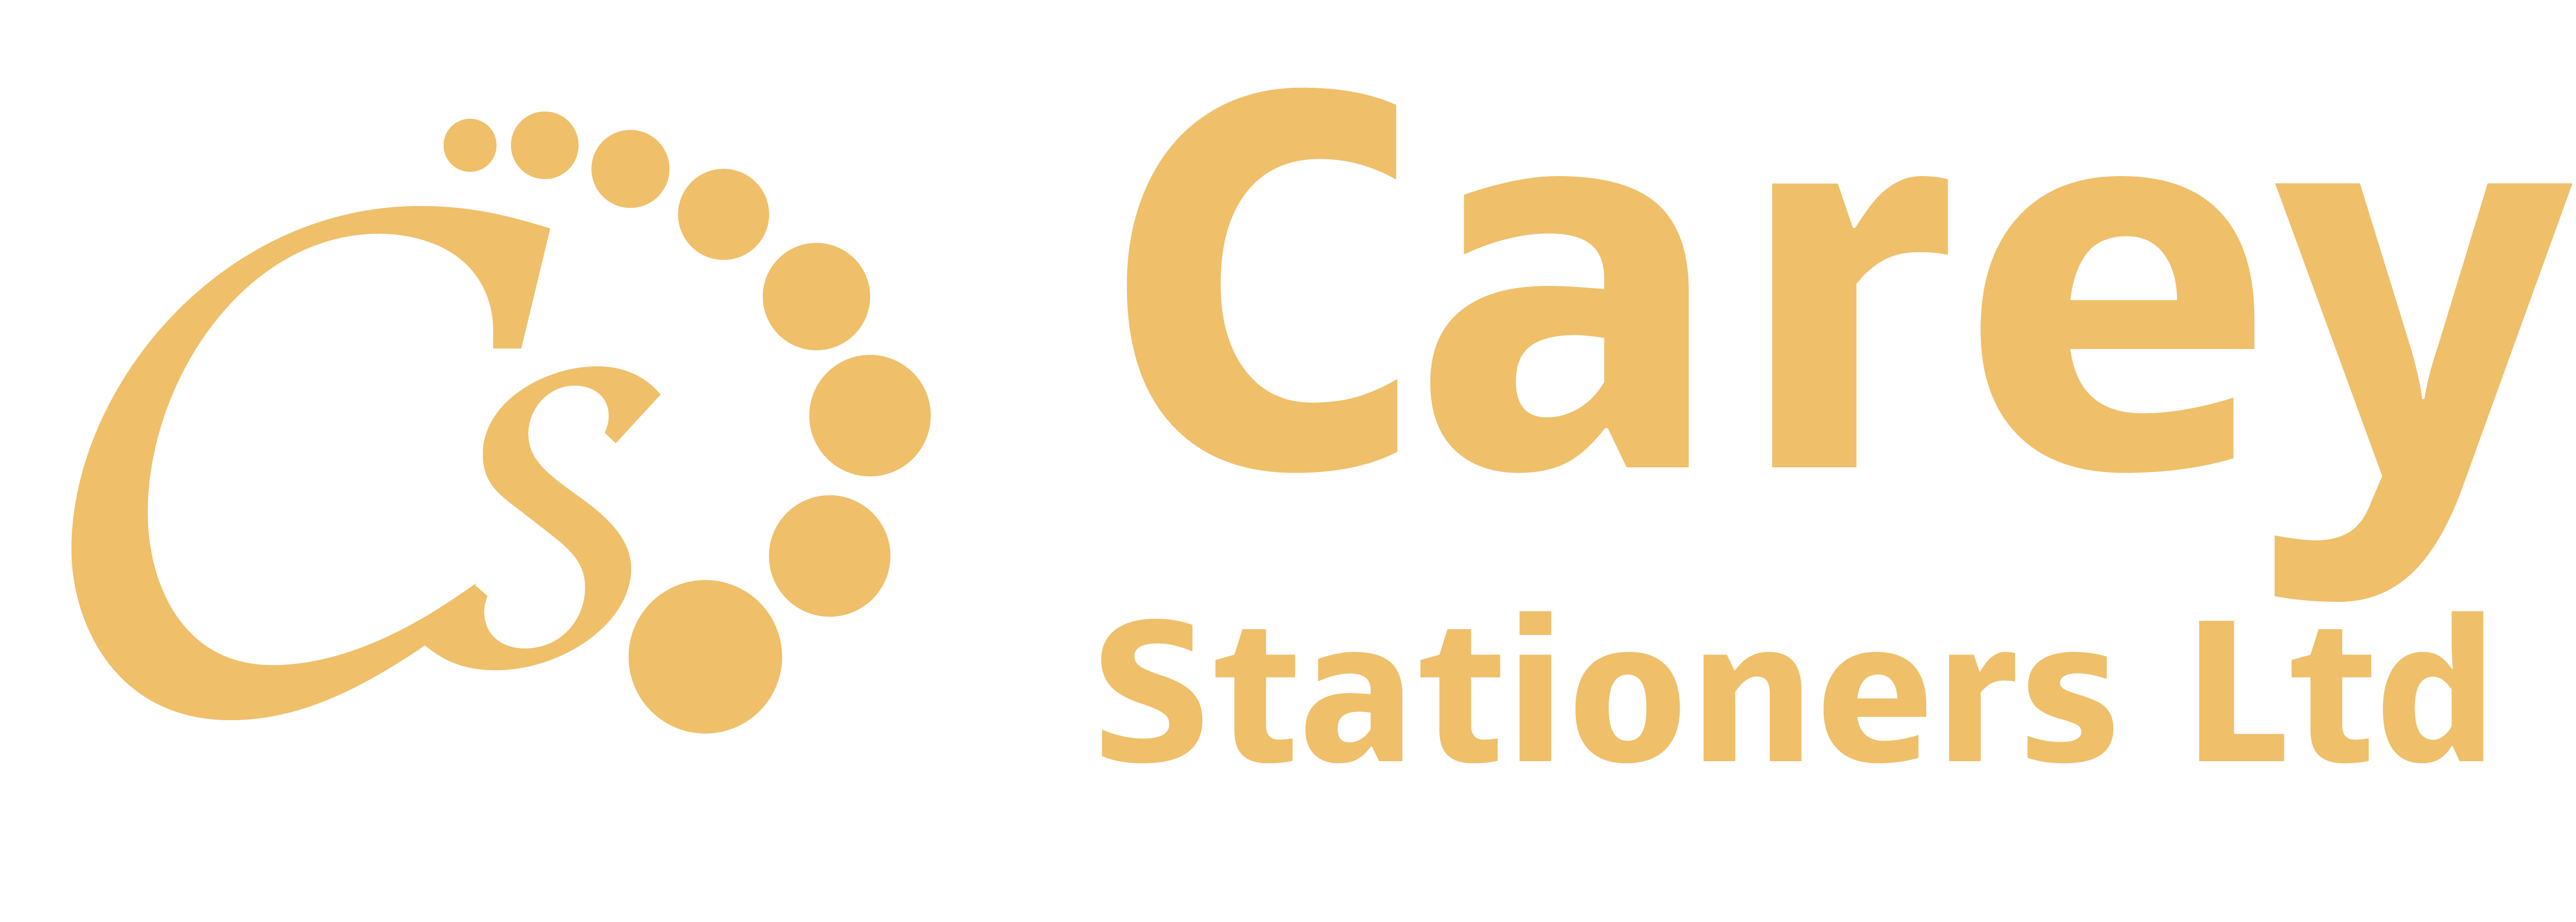 Stationery suppliers | Carey Stationers Ltd